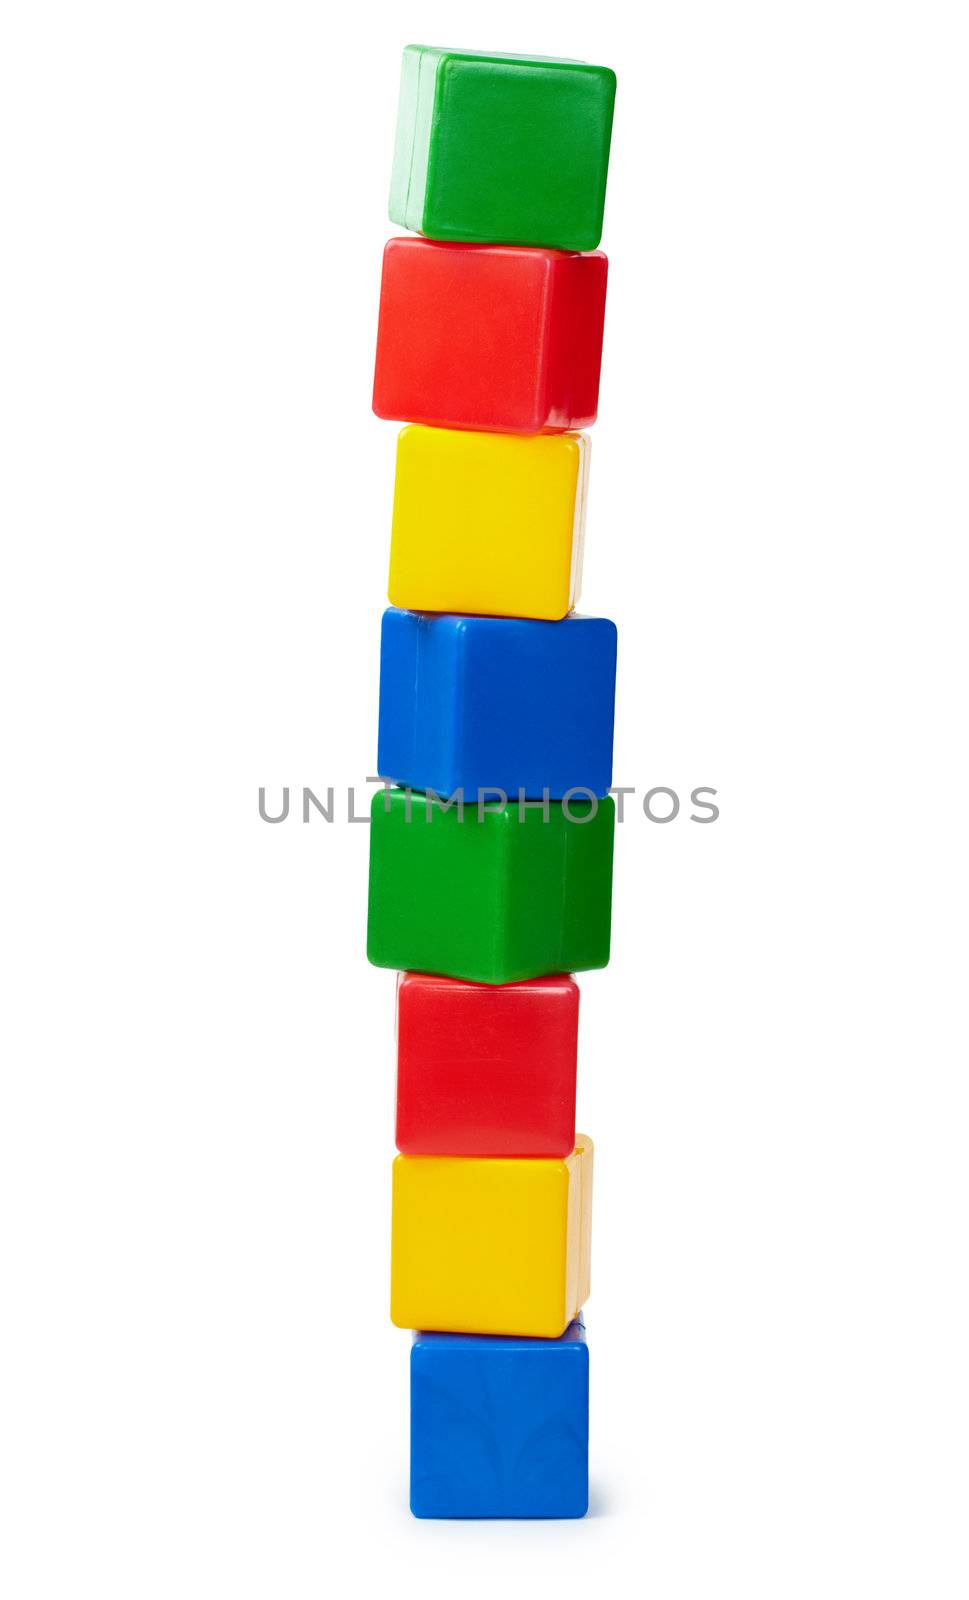 Tower of colored cubes toy isolated on white background